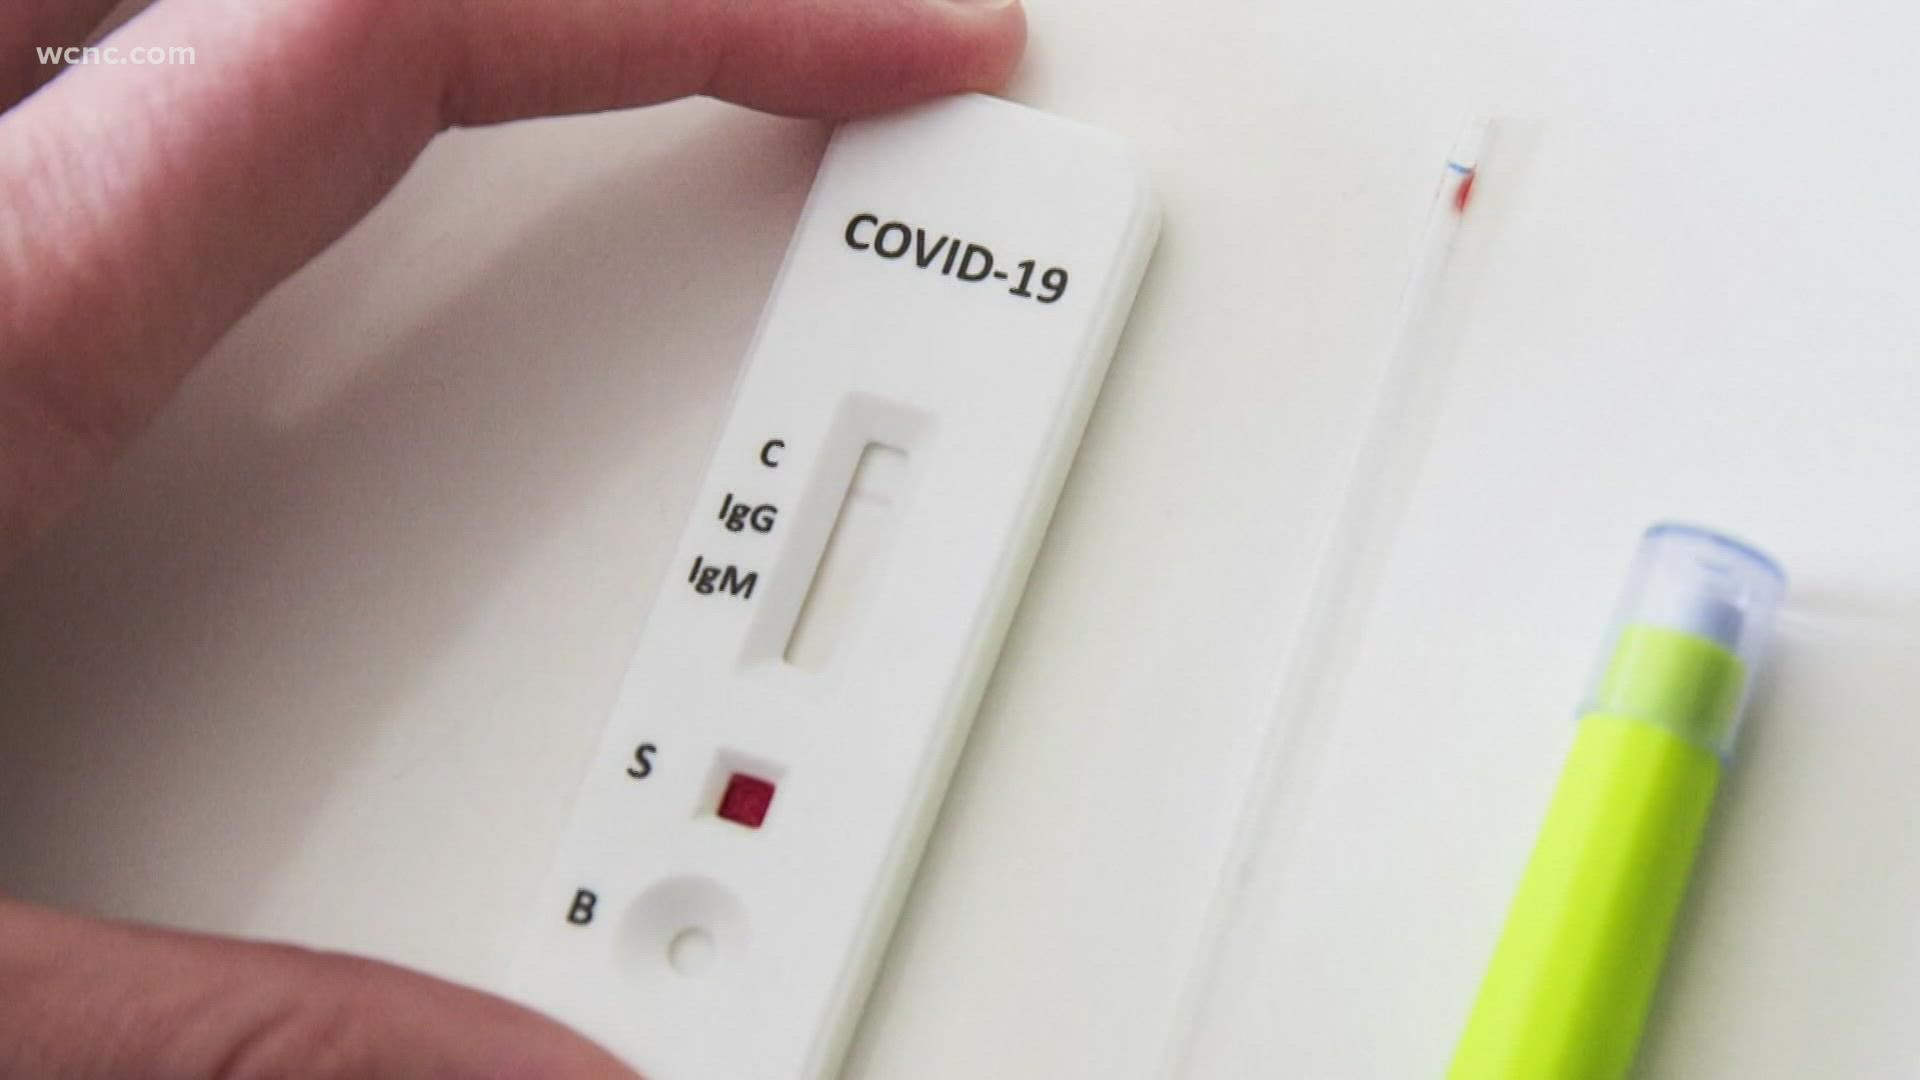 The demand for at-home COVID-19 testing is through the roof. South Carolina is trying to help that by distributing thousands of tests to health departments.